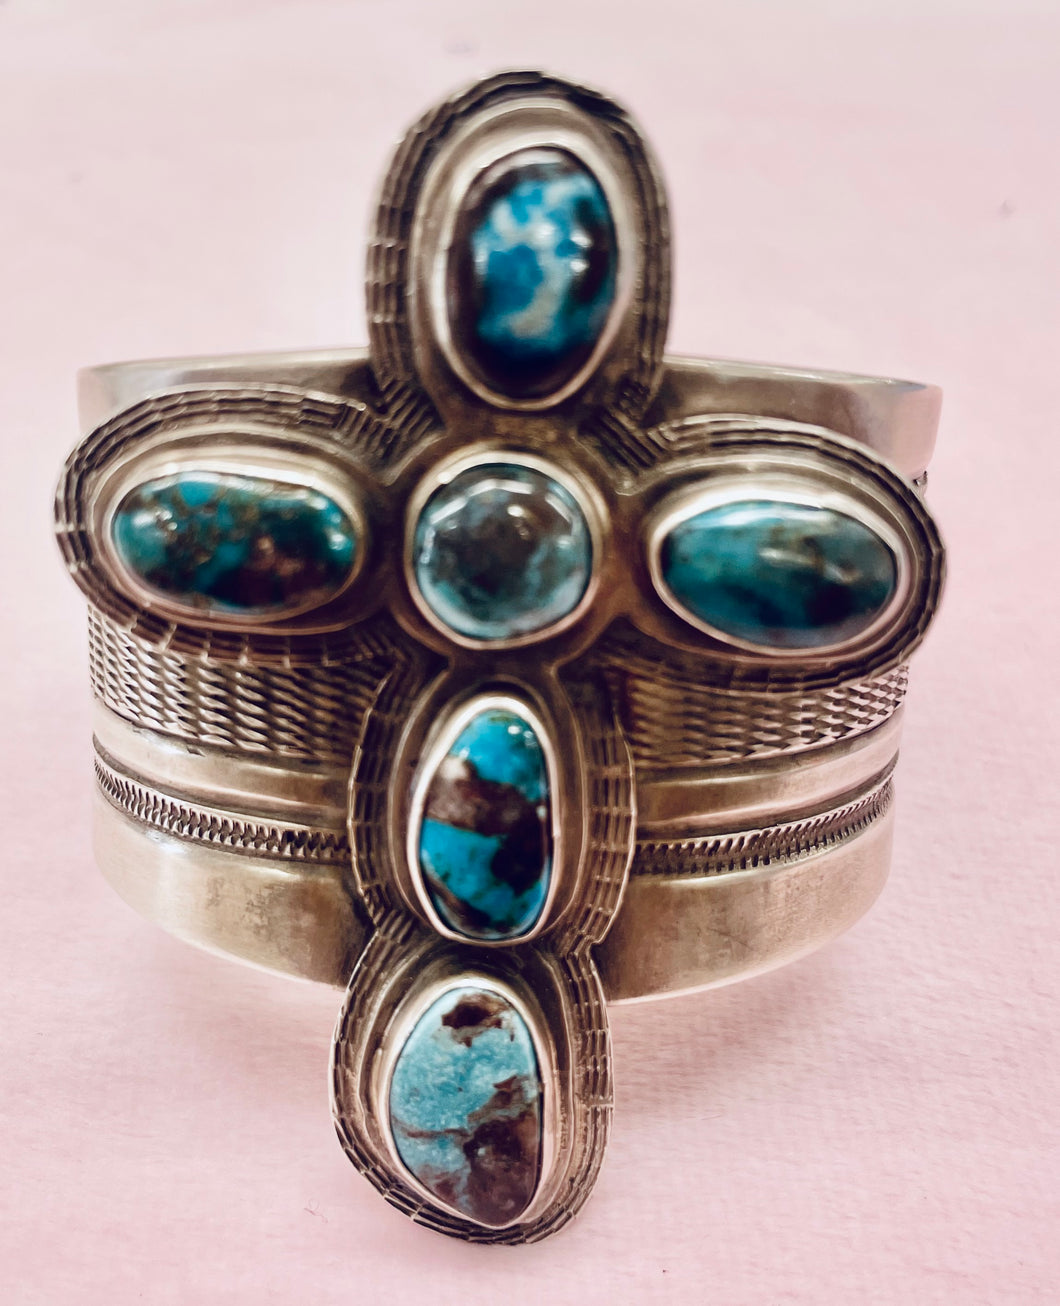 Tommy Jackson Cross Cuff Bracelet with Turquoise Stones